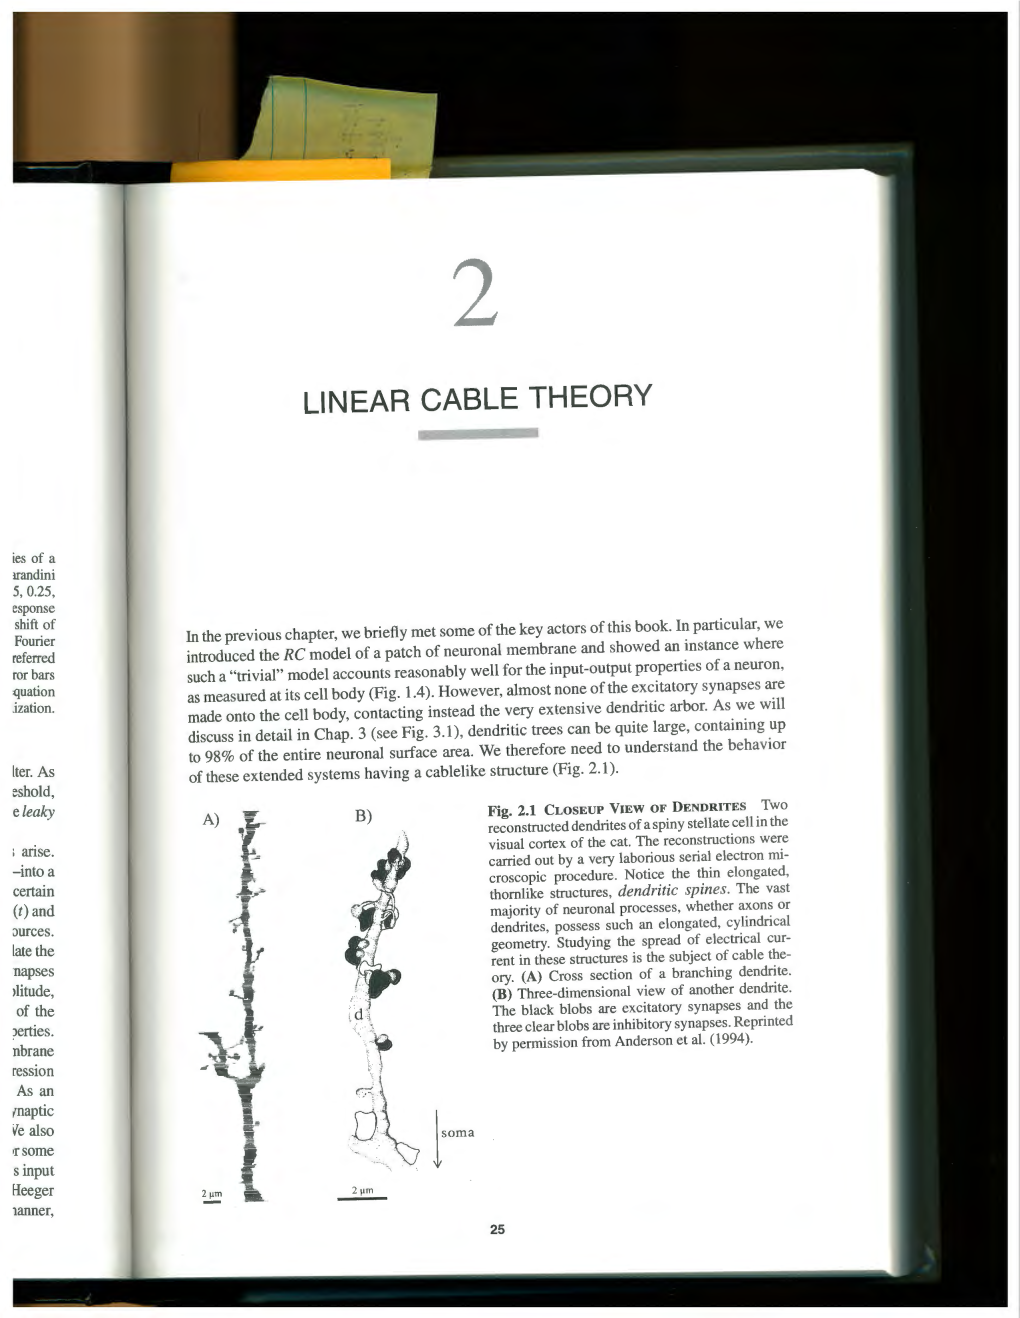 Linear Cable Theory